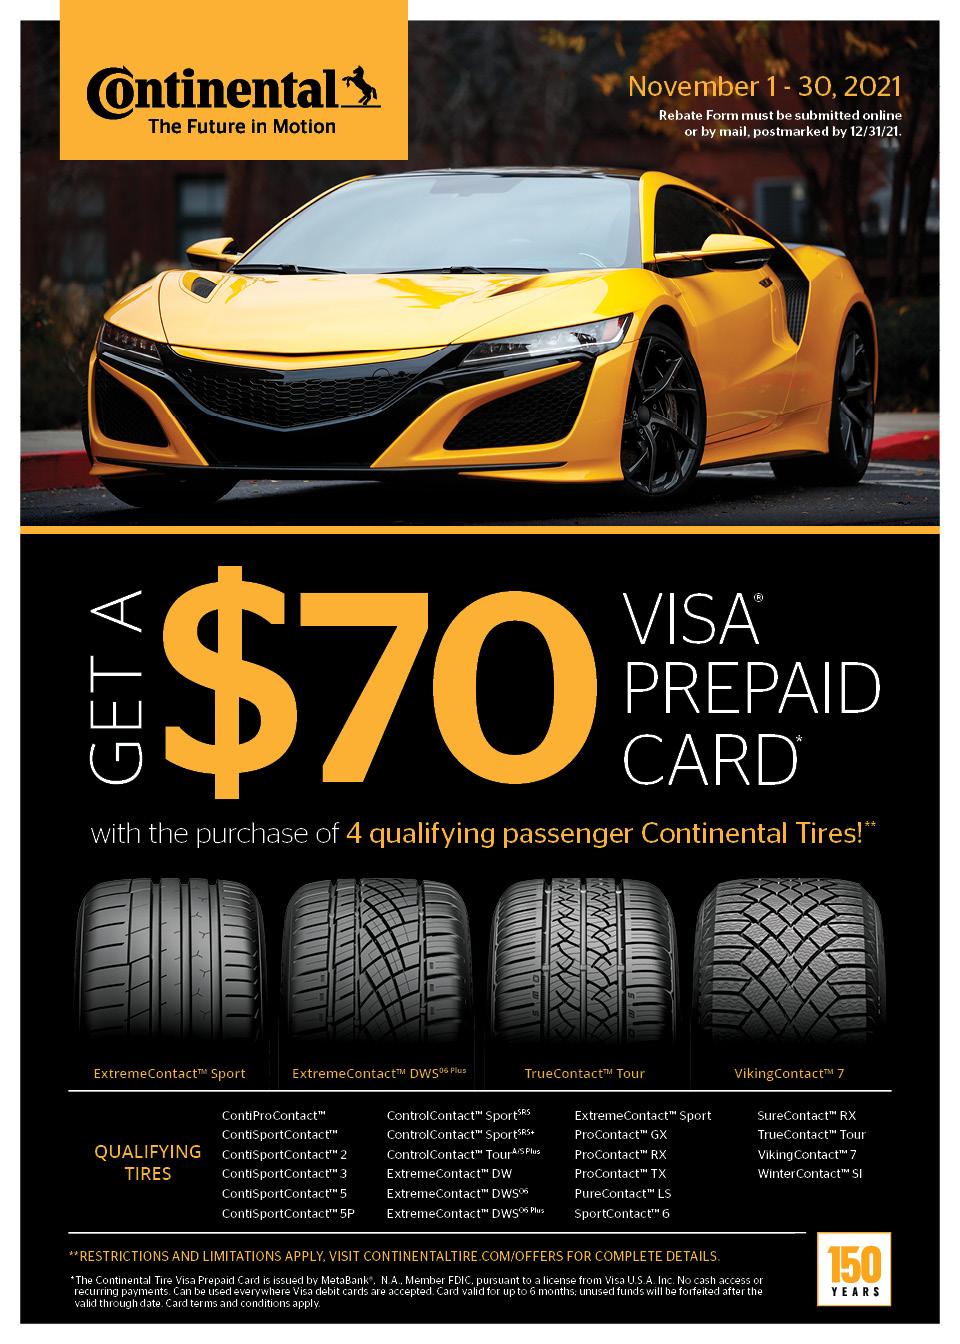 continental-tires-rebate-find-the-best-tire-deals-at-tire-works